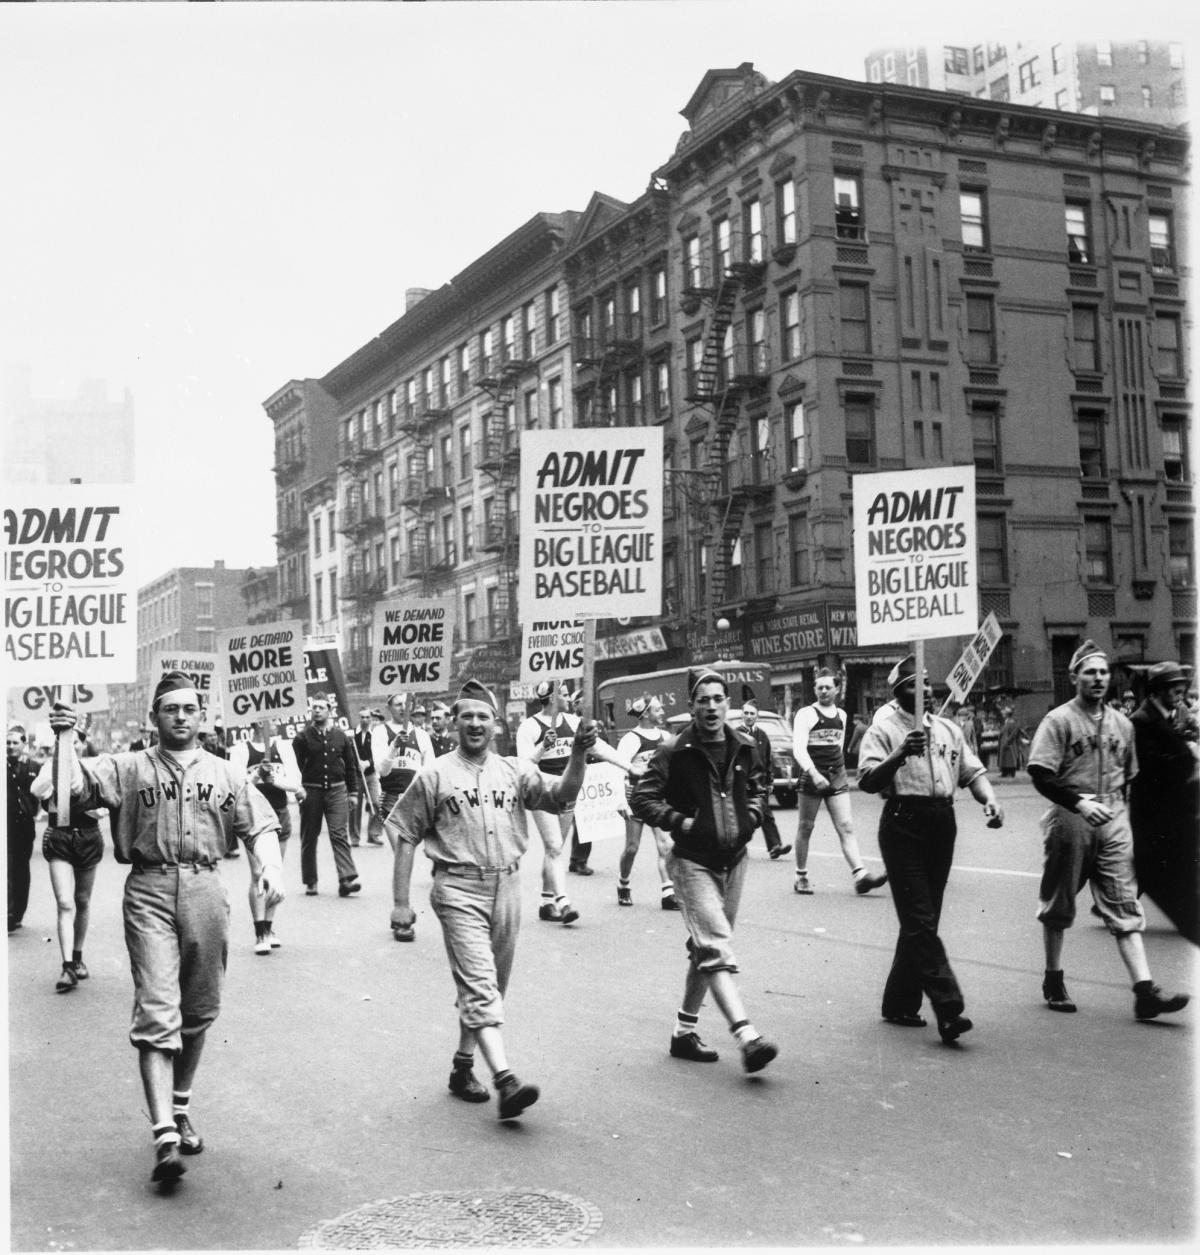 Protesters march in the streets holding signs